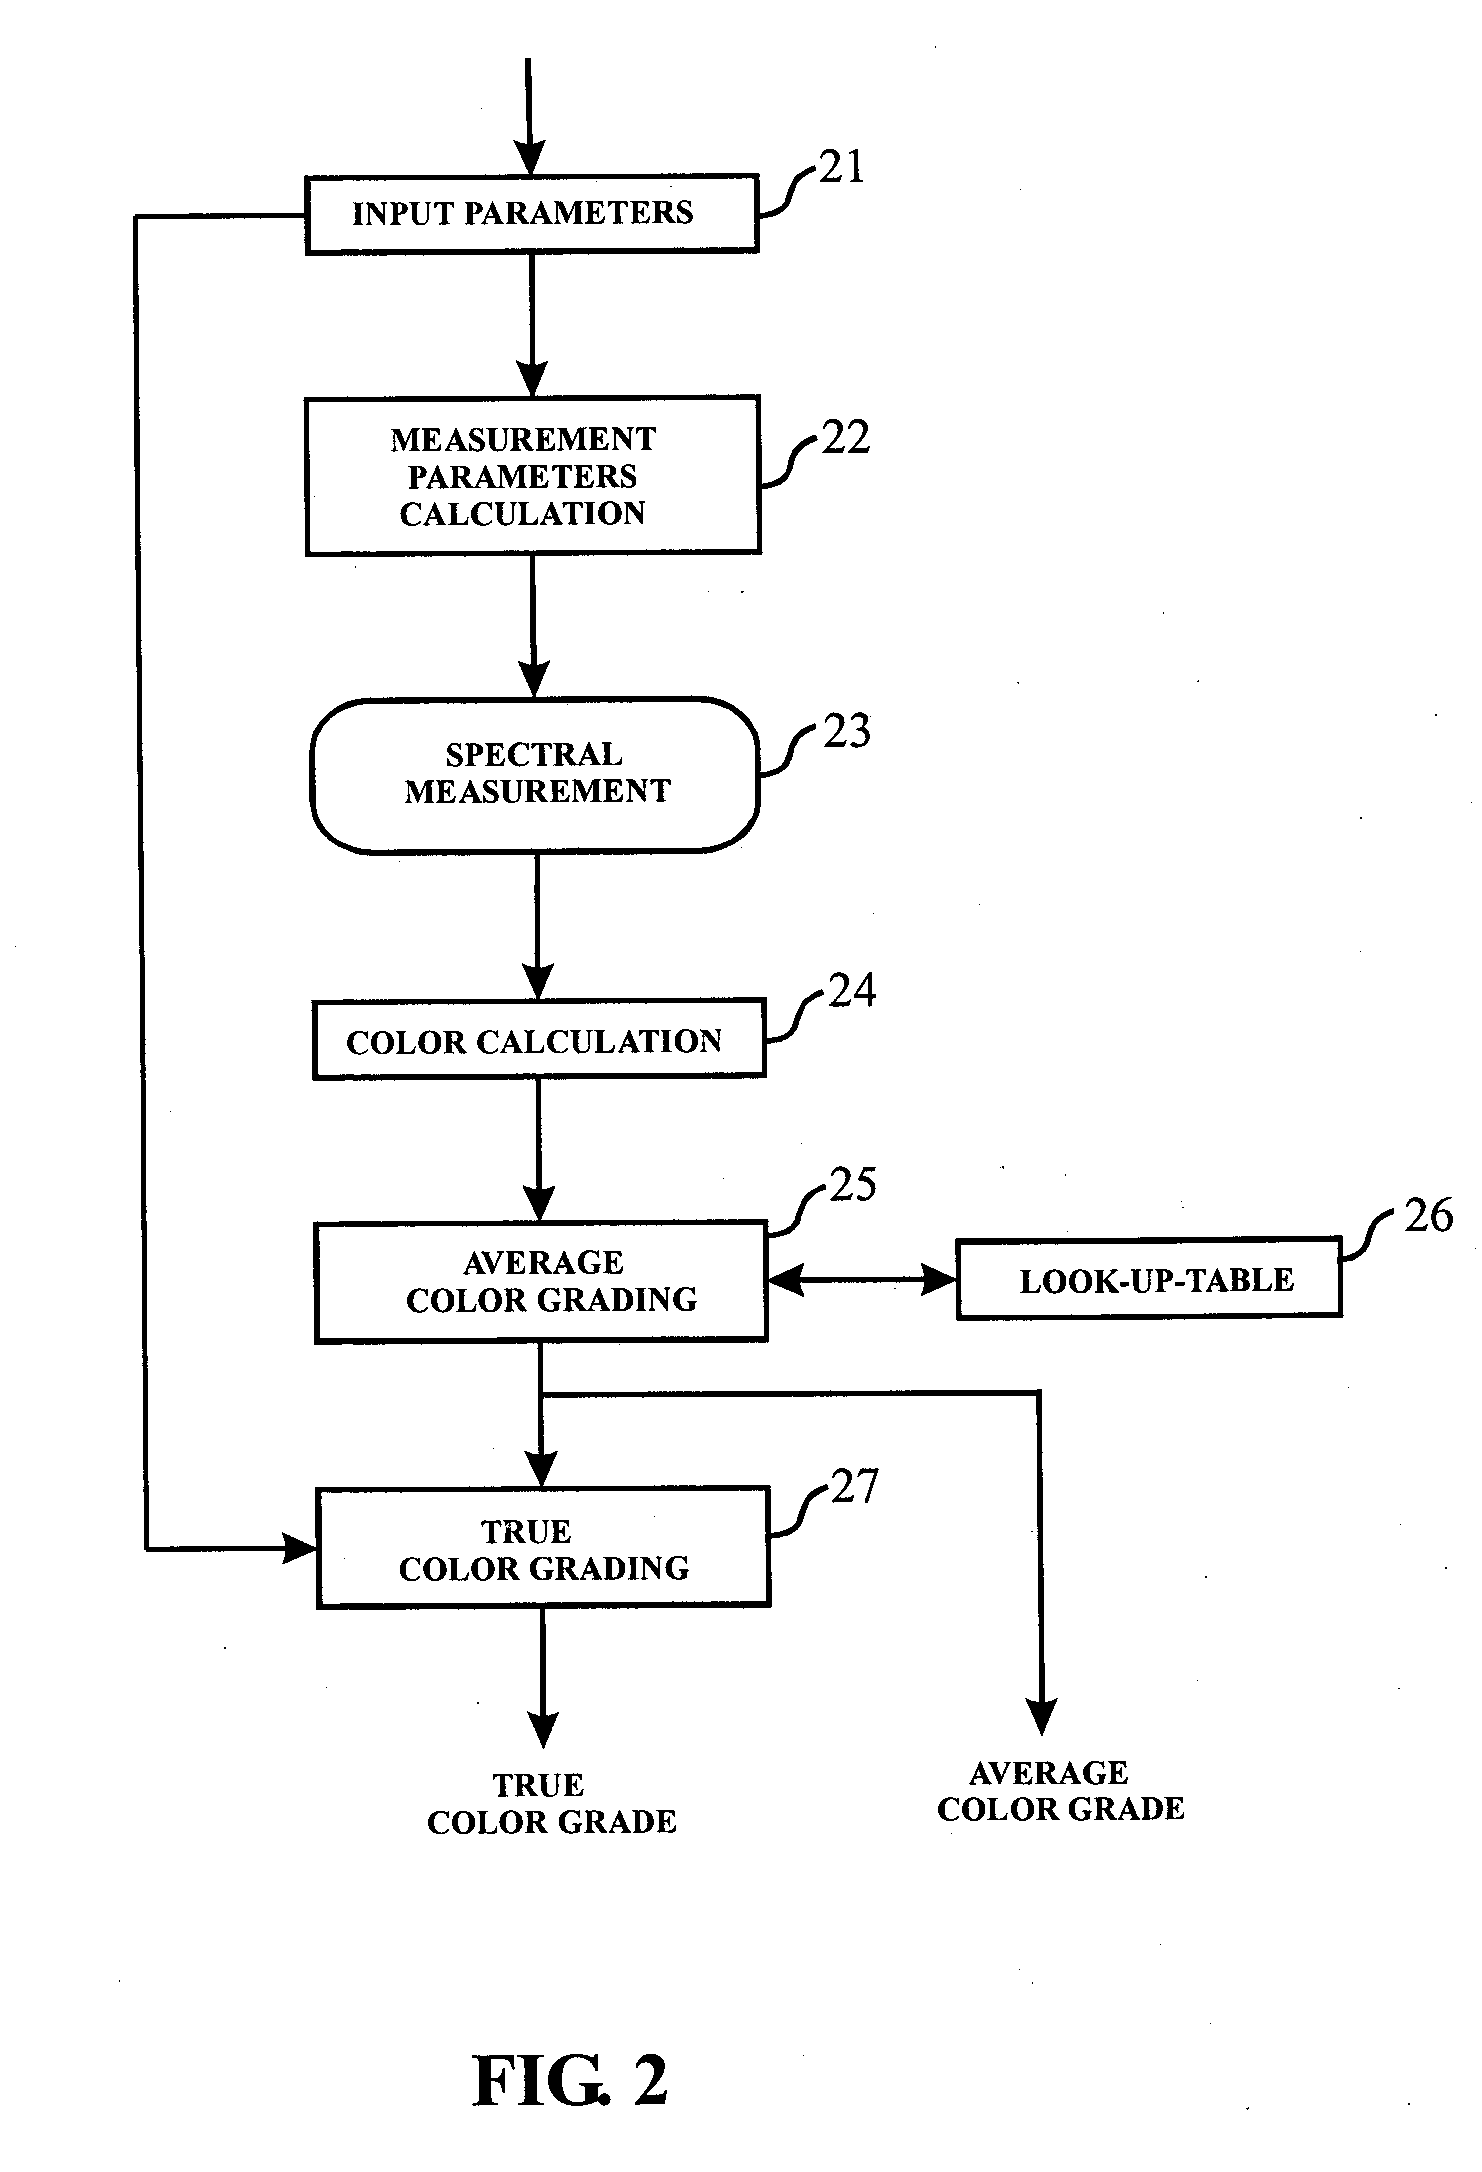 Apparatus and method for color measurement and color grading of diamonds, gemstones and the like